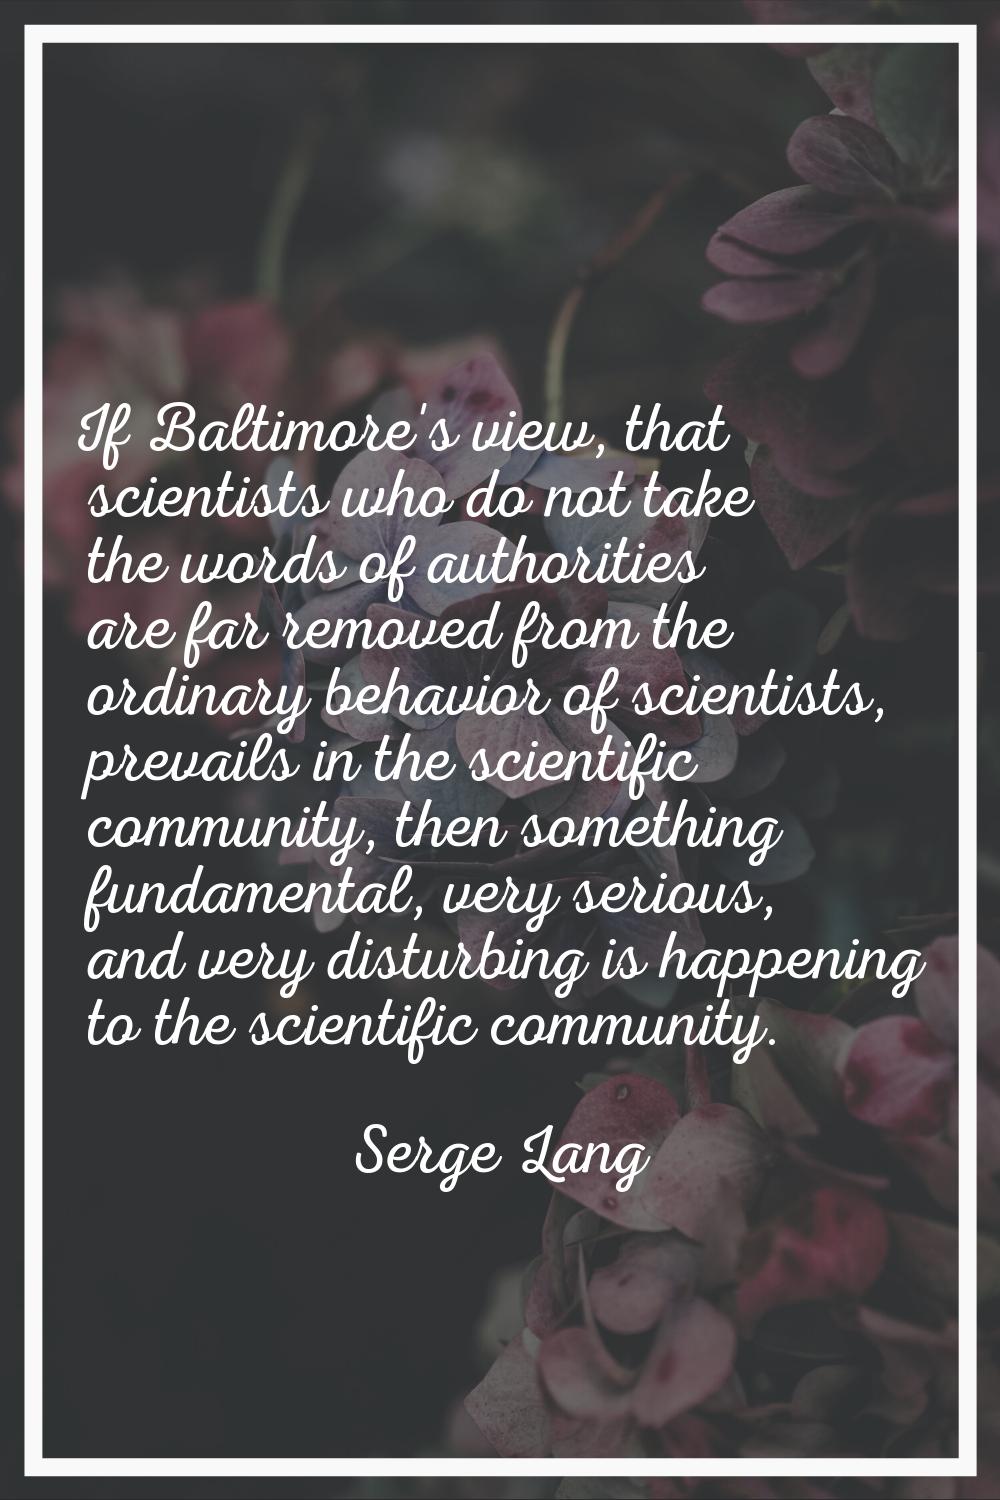 If Baltimore's view, that scientists who do not take the words of authorities are far removed from 